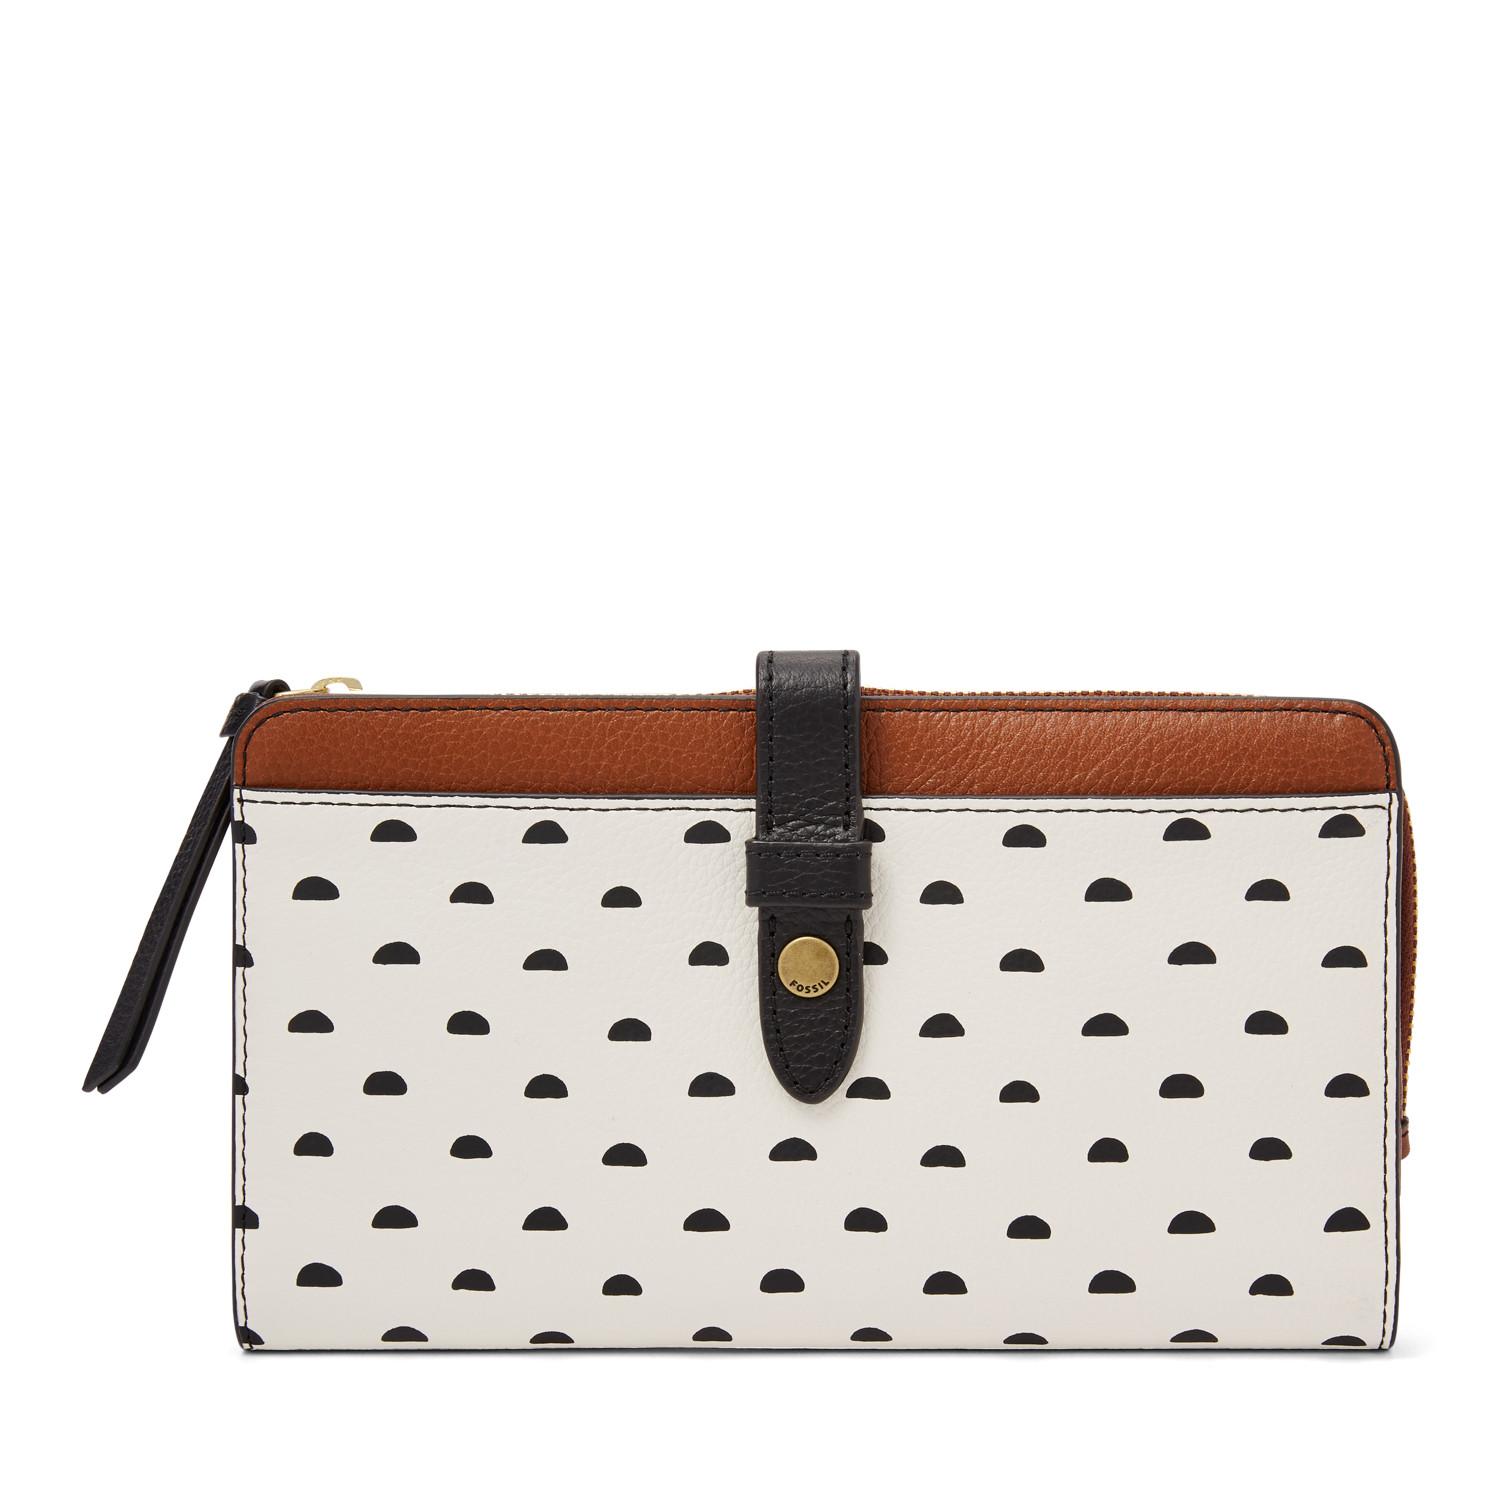 Fossil Fiona Tab Clutch Wallet White Multi in Brown - Save 41% - Lyst